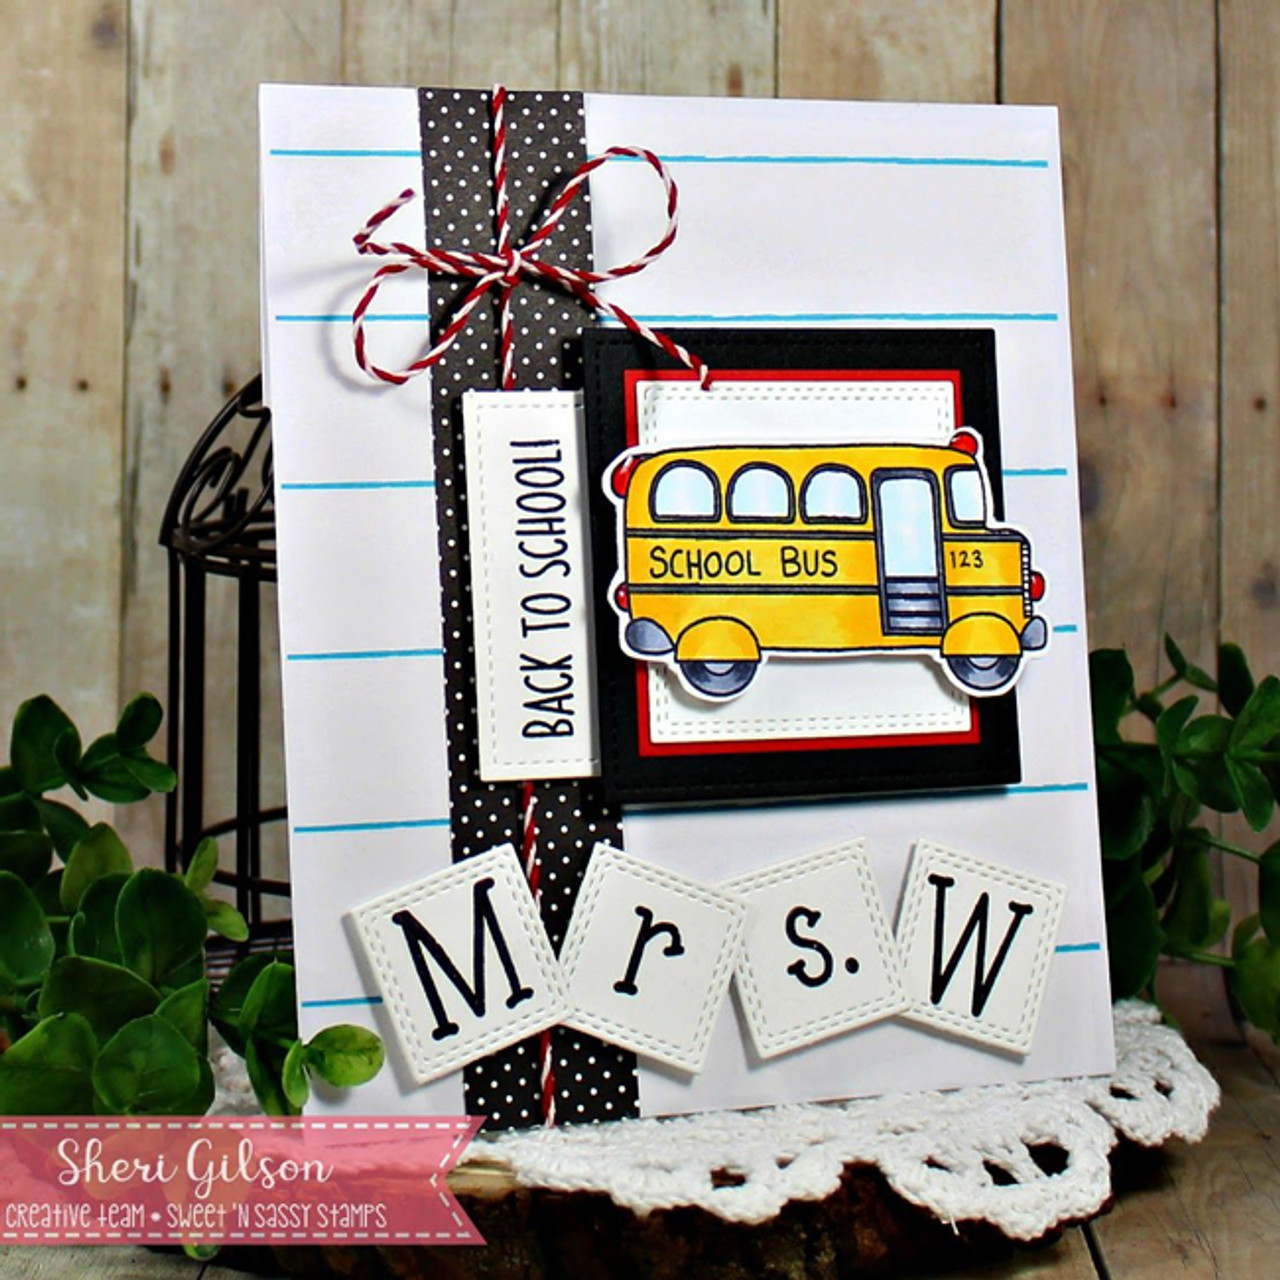 Back to School Clear Stamp Set - Sweet 'n Sassy Stamps, LLC